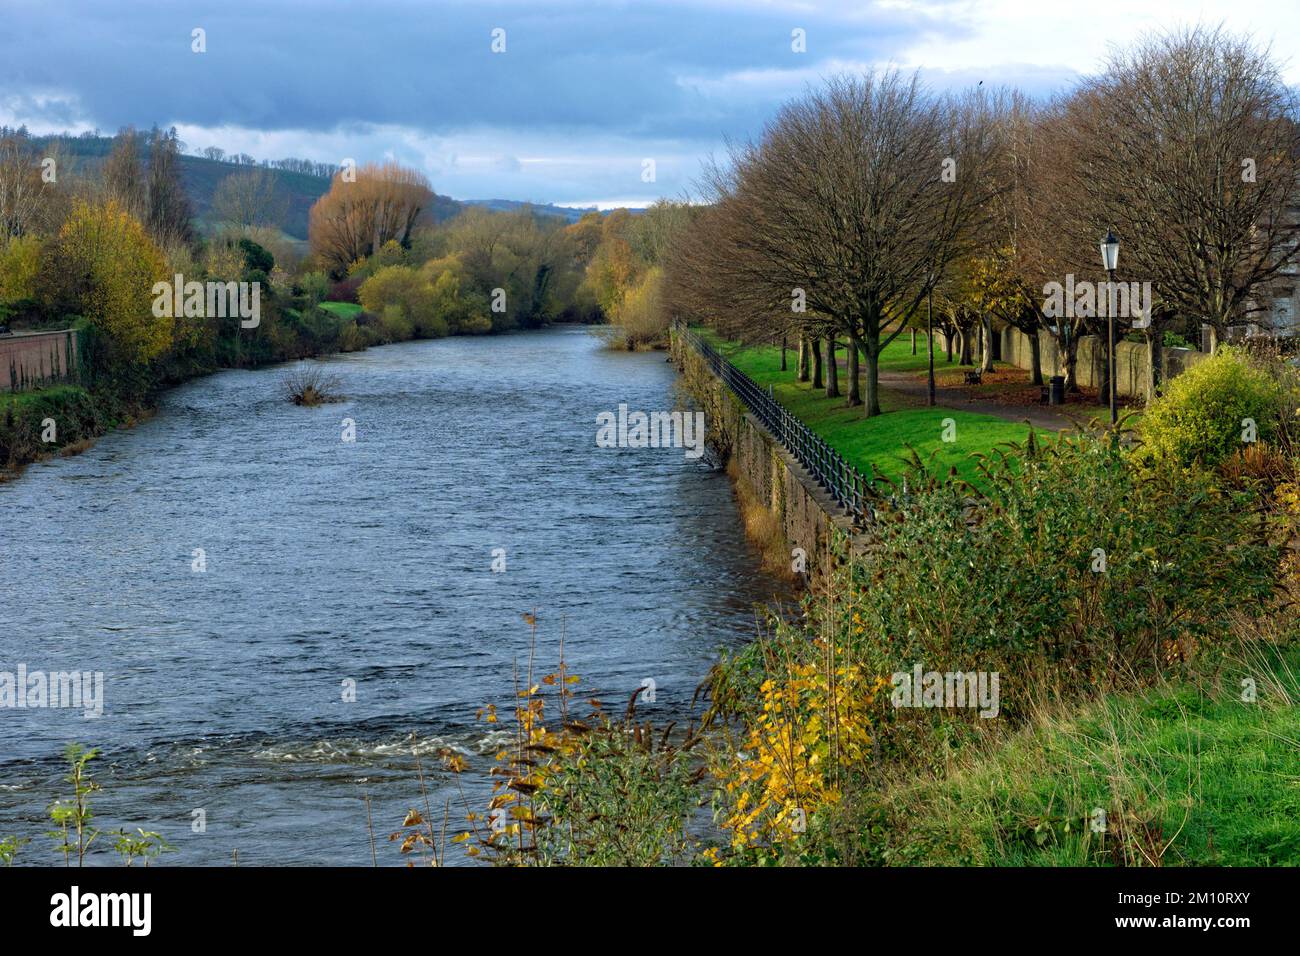 Fiume Usk, Brecon, Powys, Galles. Foto Stock